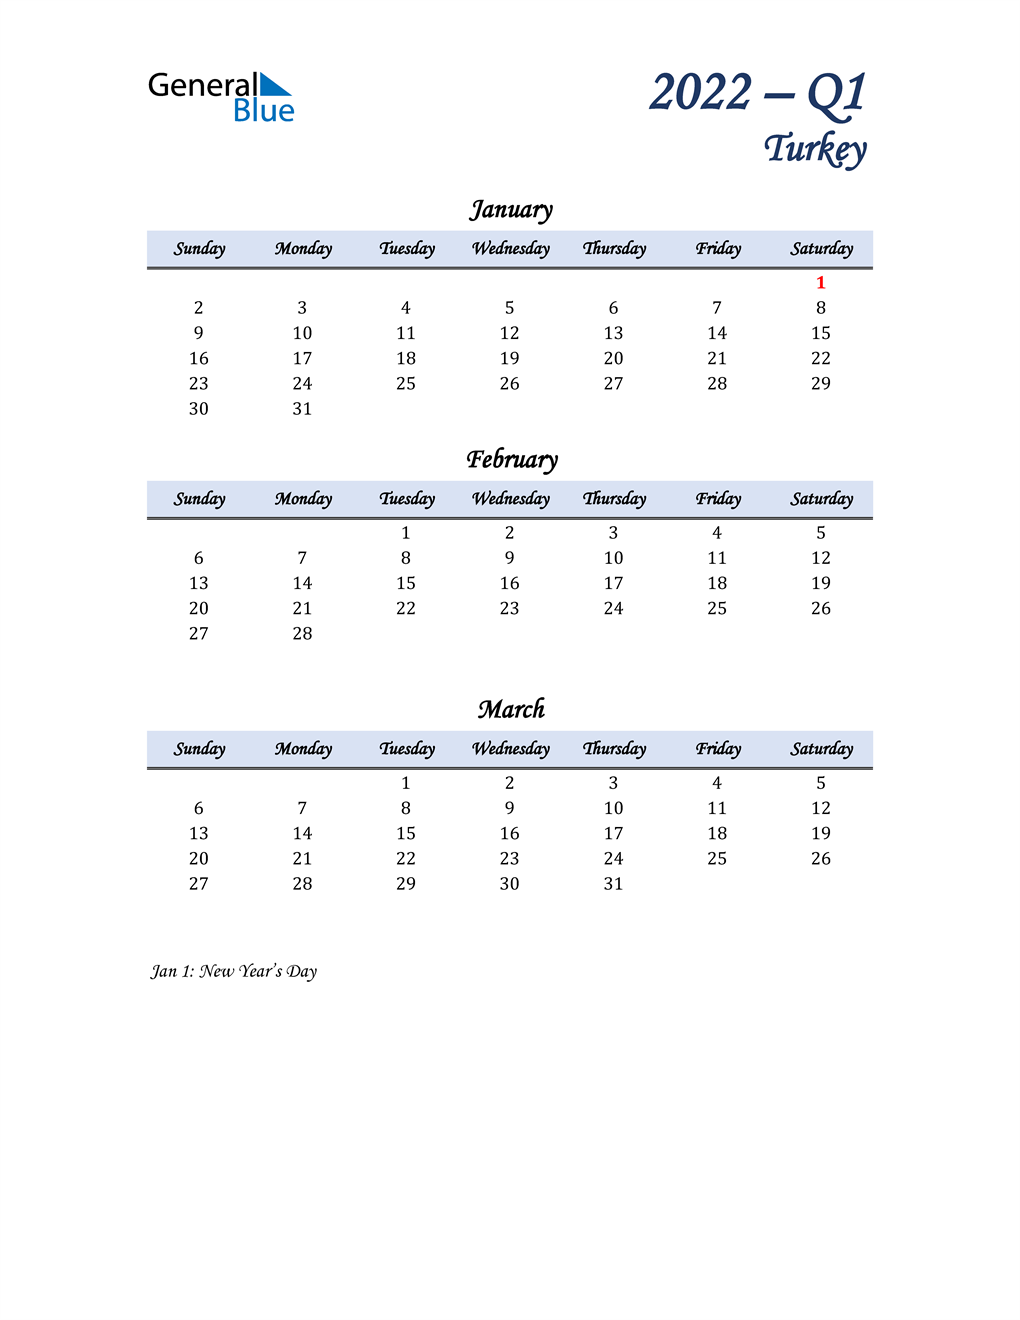  January, February, and March Calendar for Turkey